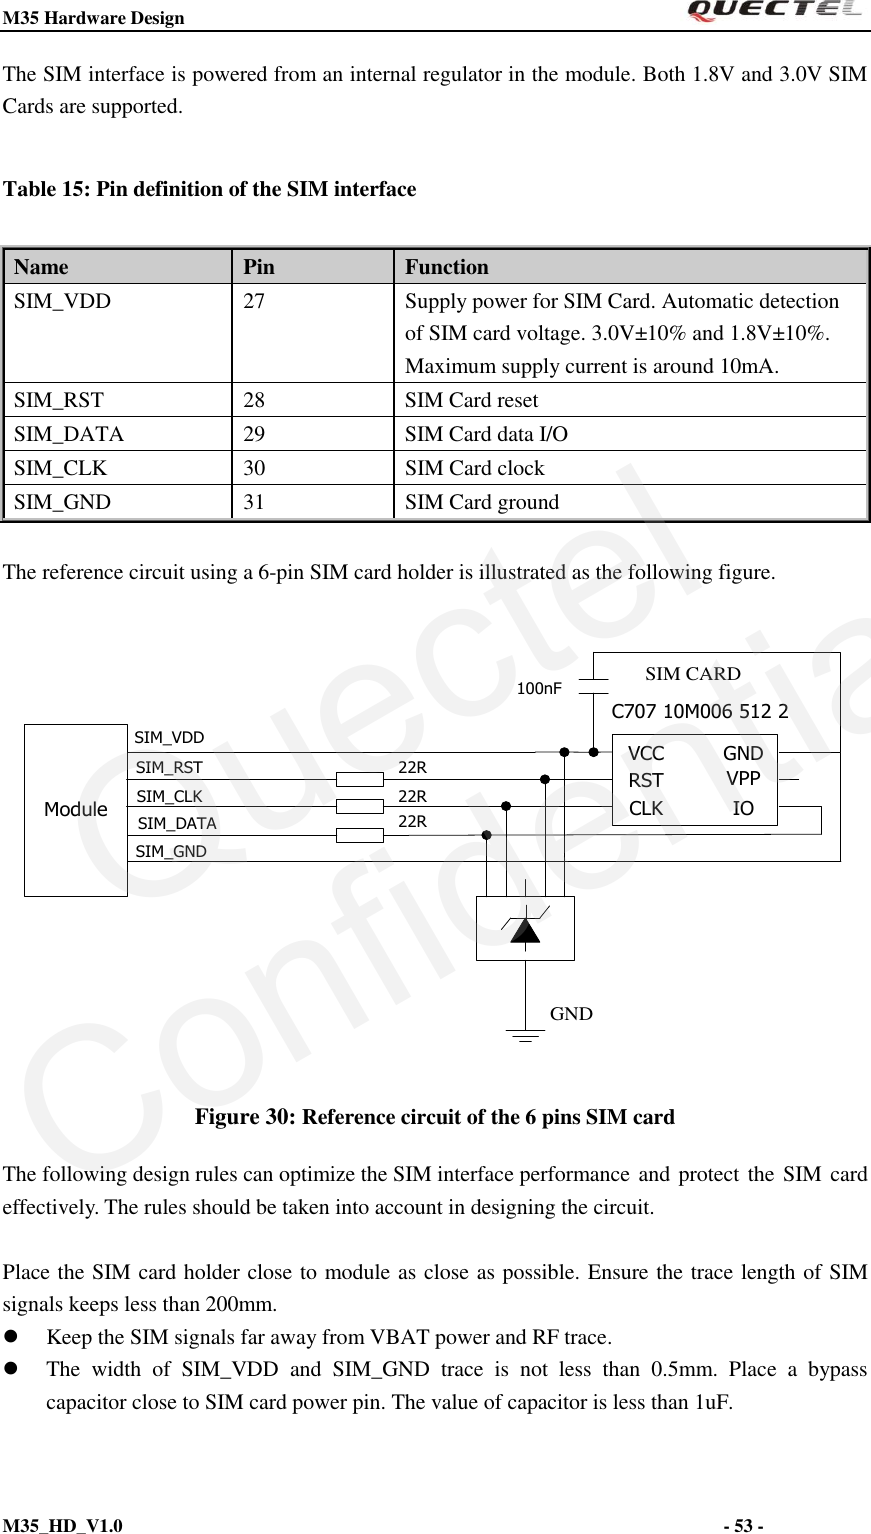 M35 Hardware Design                                                                  M35_HD_V1.0                                                                                                                         - 53 -    The SIM interface is powered from an internal regulator in the module. Both 1.8V and 3.0V SIM Cards are supported. Table 15: Pin definition of the SIM interface  The reference circuit using a 6-pin SIM card holder is illustrated as the following figure.  Module22R22R22RC707 10M006 512 2SIM CARDGNDSIM_VDDSIM_RSTSIM_CLKSIM_DATASIM_GND100nFVCCRSTCLKGNDVPPIO Figure 30: Reference circuit of the 6 pins SIM card The following design rules can optimize the SIM interface performance and protect the SIM card effectively. The rules should be taken into account in designing the circuit.  Place the SIM card holder close to module as close as possible. Ensure the trace length of SIM signals keeps less than 200mm.  Keep the SIM signals far away from VBAT power and RF trace.  The  width  of  SIM_VDD  and  SIM_GND  trace  is  not  less  than  0.5mm.  Place  a  bypass capacitor close to SIM card power pin. The value of capacitor is less than 1uF. Name Pin Function SIM_VDD 27 Supply power for SIM Card. Automatic detection of SIM card voltage. 3.0V±10% and 1.8V±10%. Maximum supply current is around 10mA. SIM_RST 28 SIM Card reset SIM_DATA 29 SIM Card data I/O SIM_CLK 30 SIM Card clock SIM_GND 31 SIM Card ground QuectelConfidential